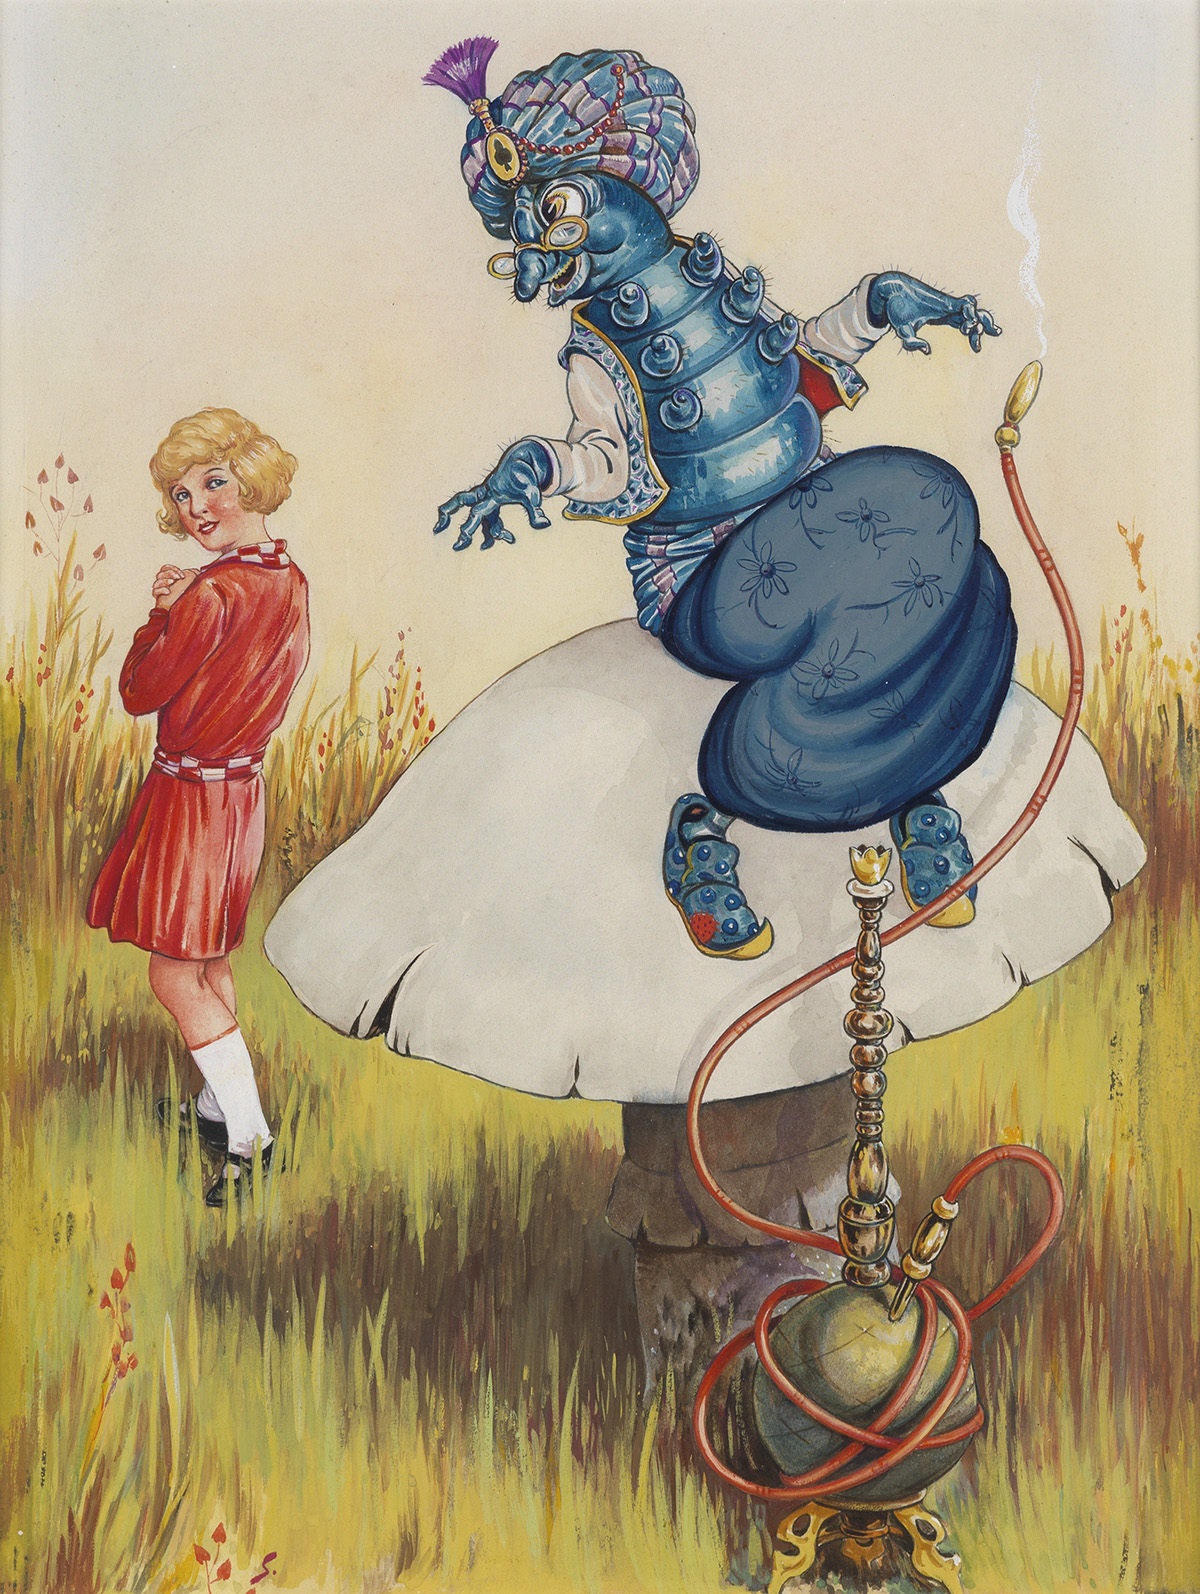 CHILDRENS ALICE IN WONDERLAND D. R. SEXTON. Come Back! the caterpillar called after her.